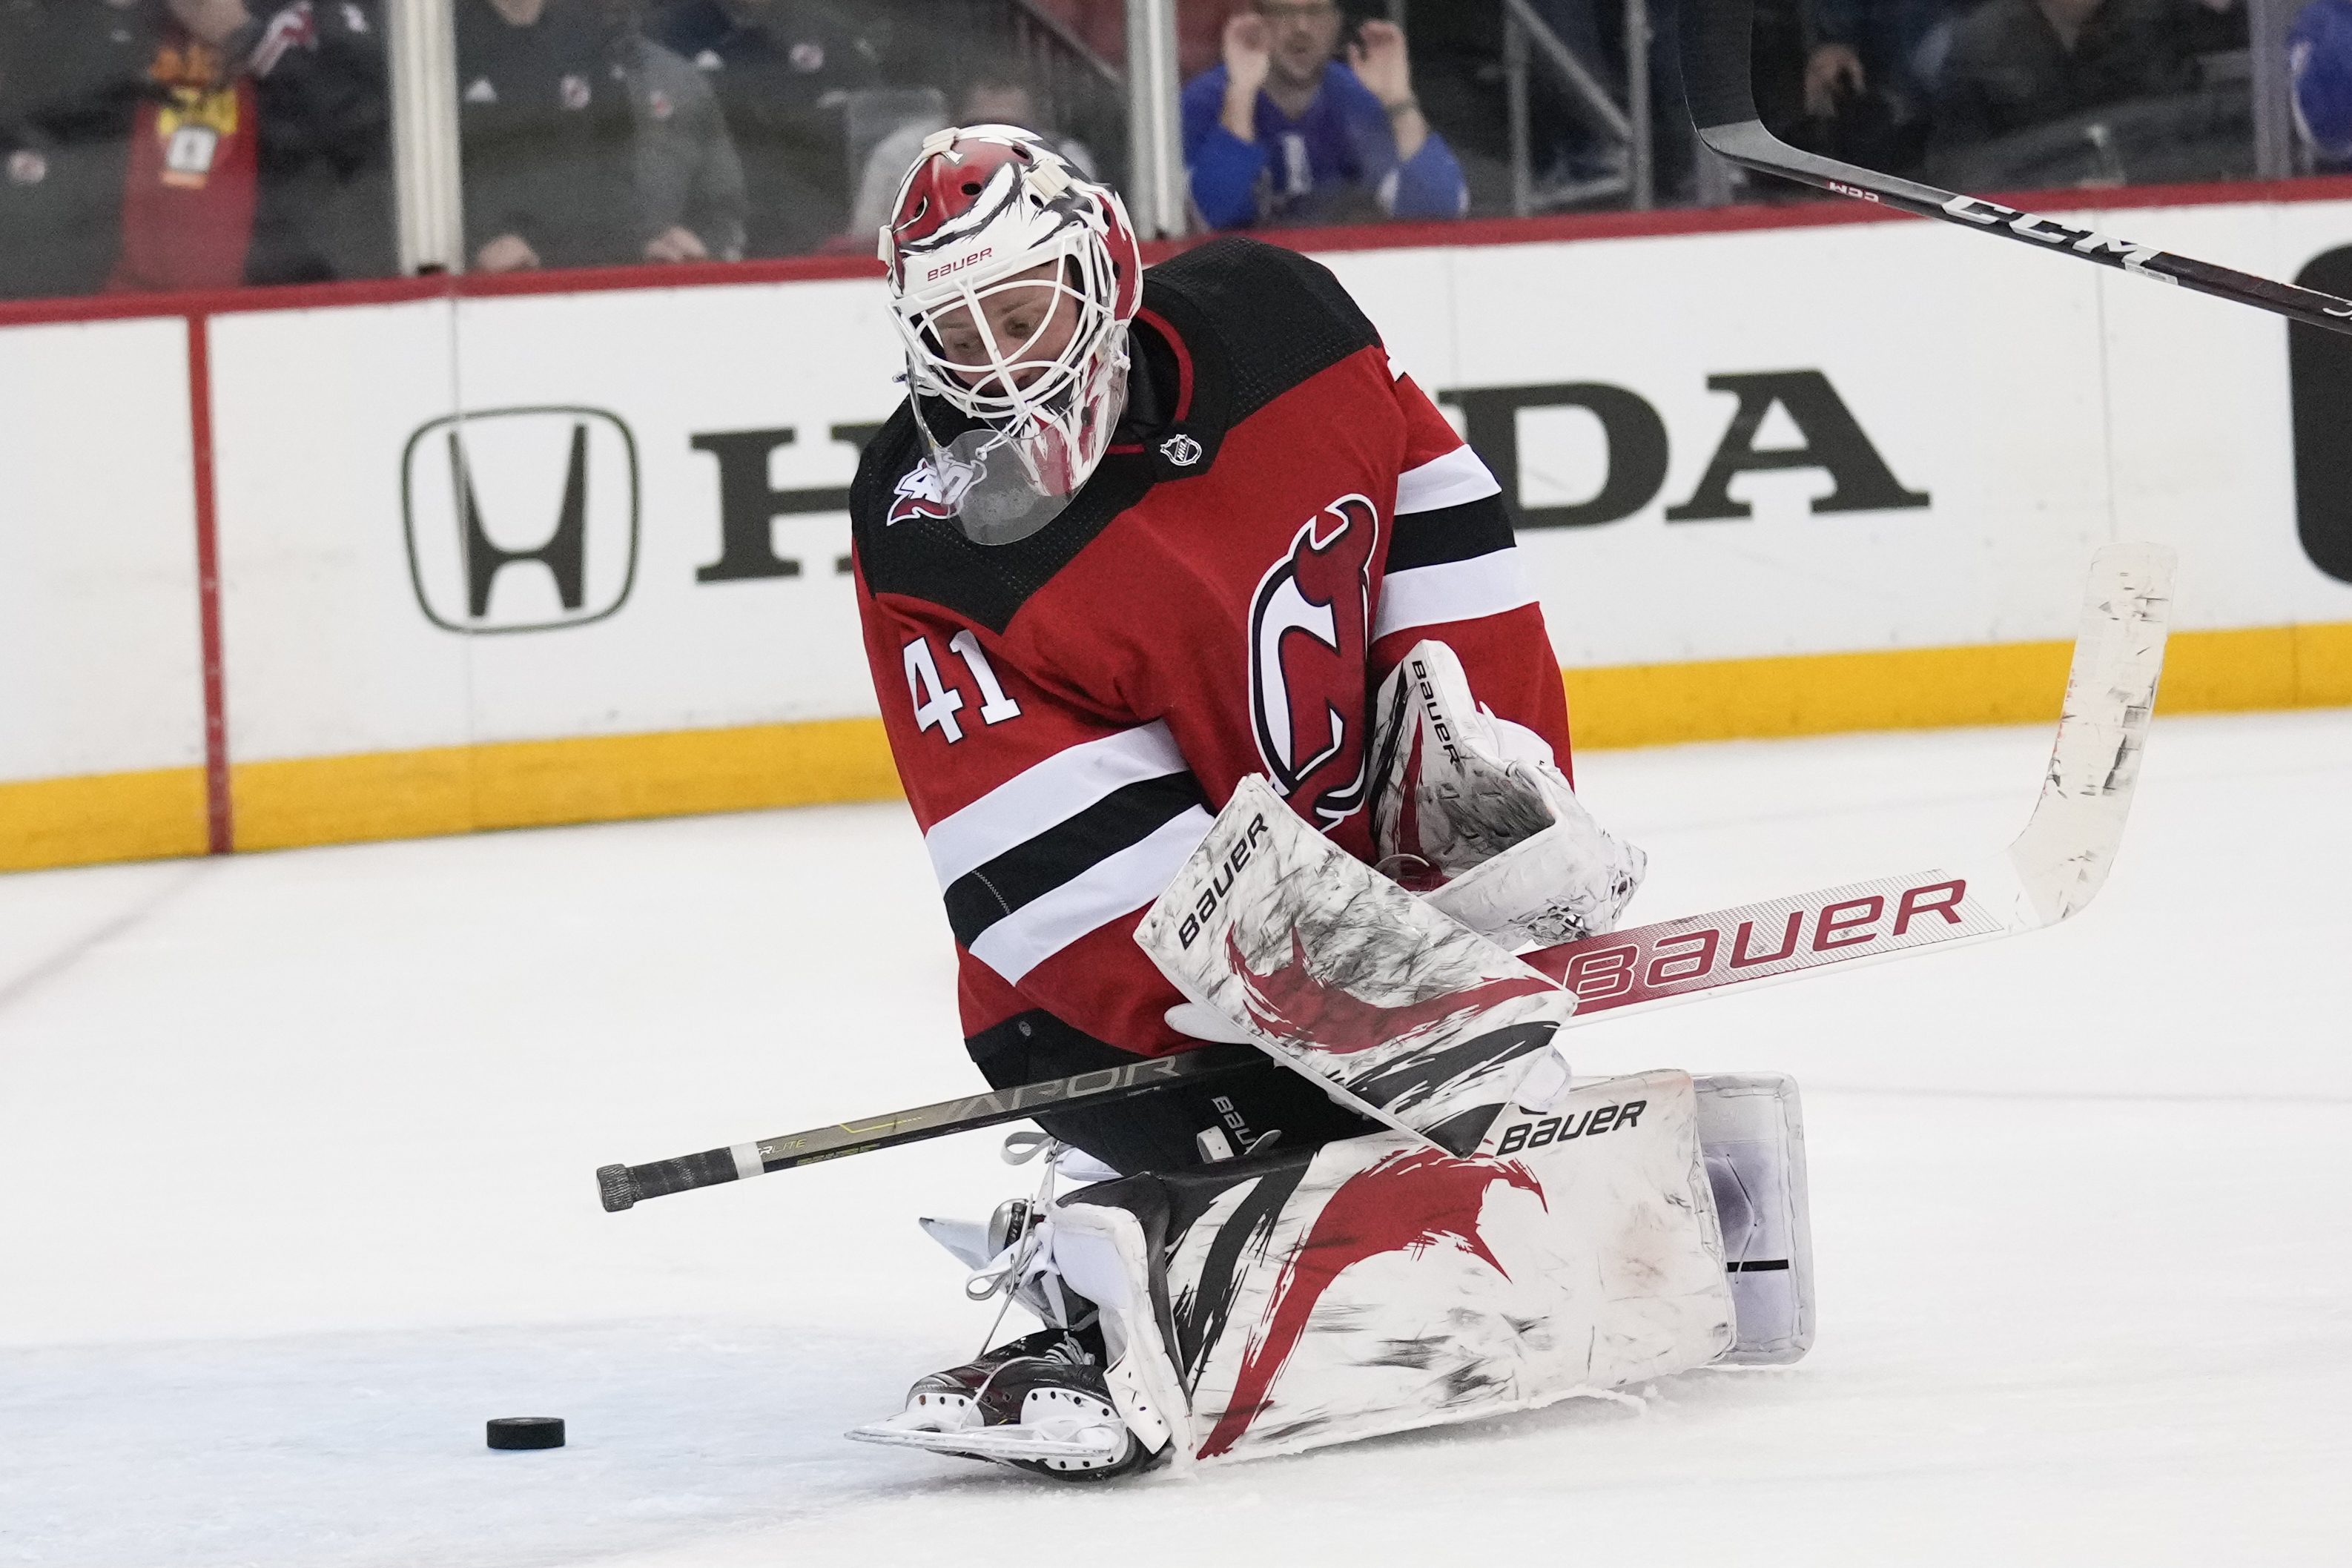 New Jersey Devils goaltender Akira Schmid, back, makes a glove save as  defenseman Dougie Hamilton watches during the third period of the team's  NHL hockey game against the Colorado Avalanche on Wednesday